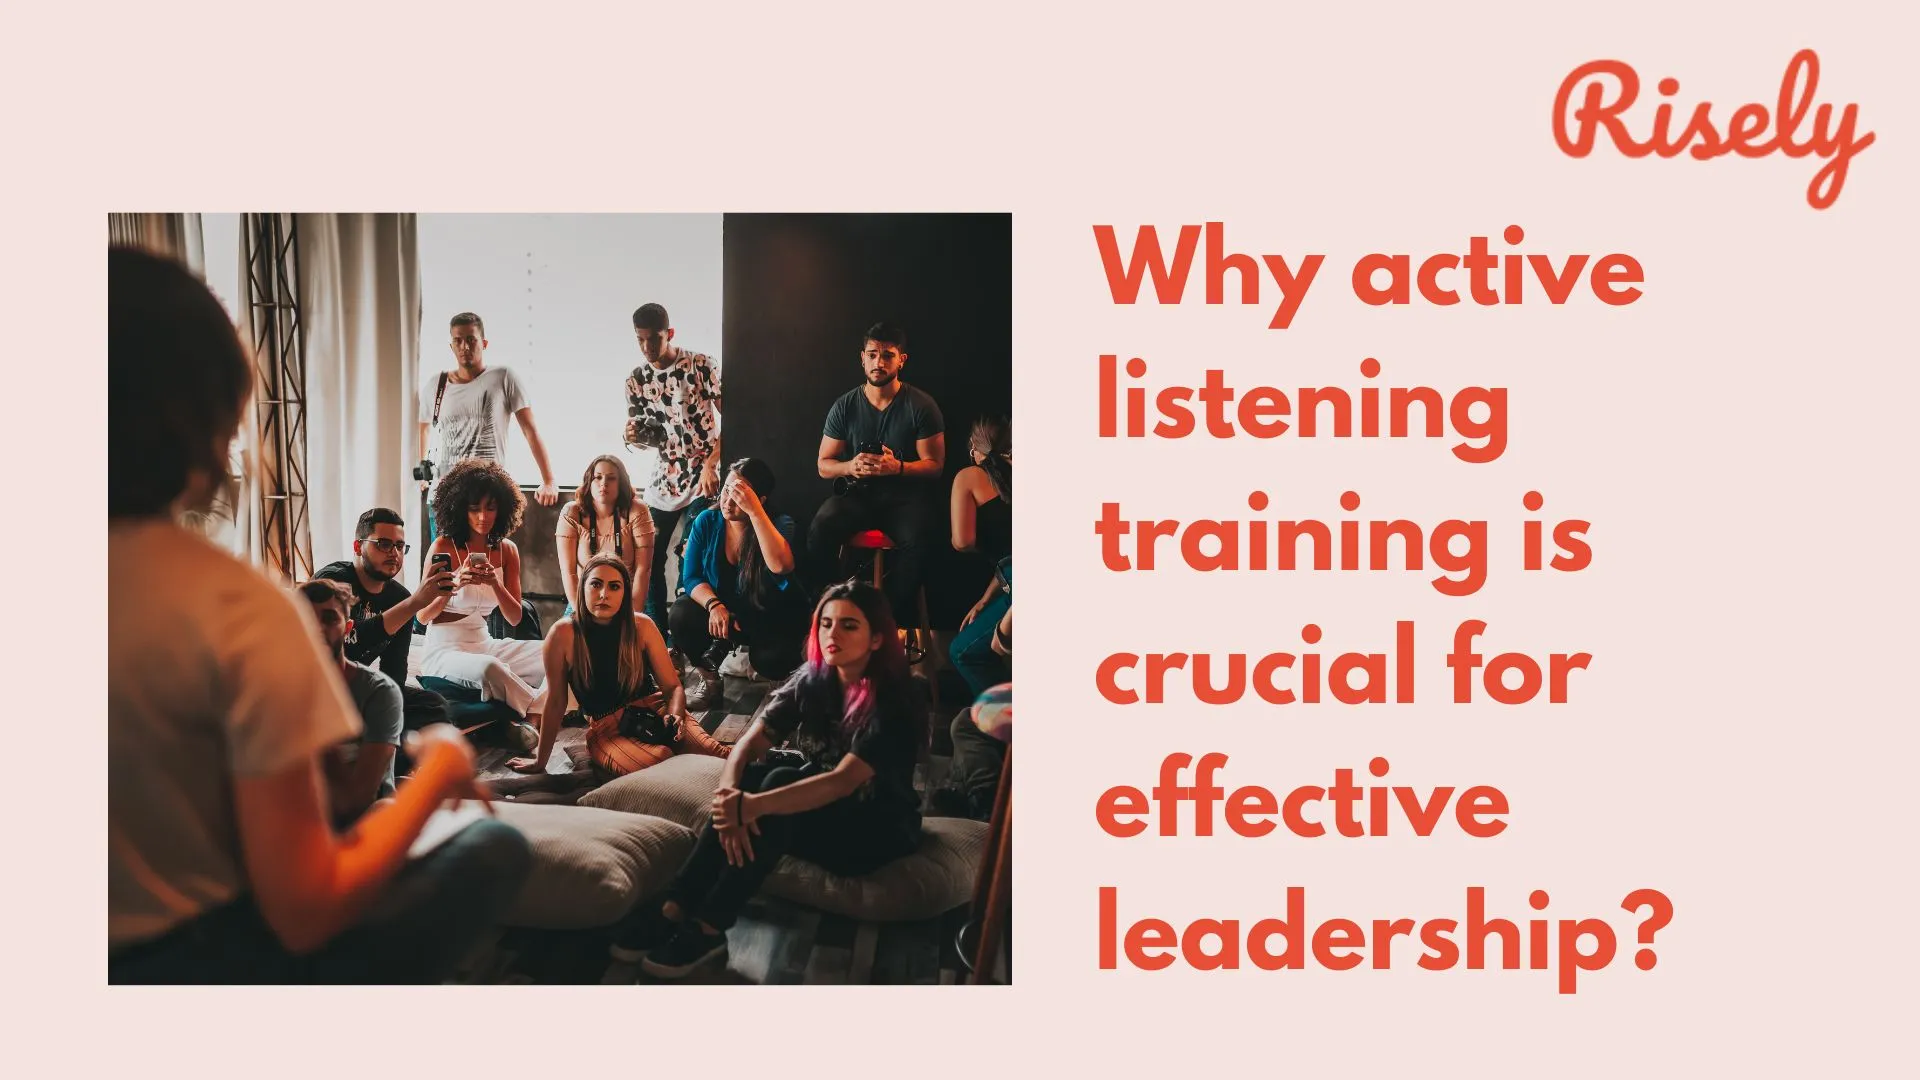 Why active listening training is crucial for effective leadership?